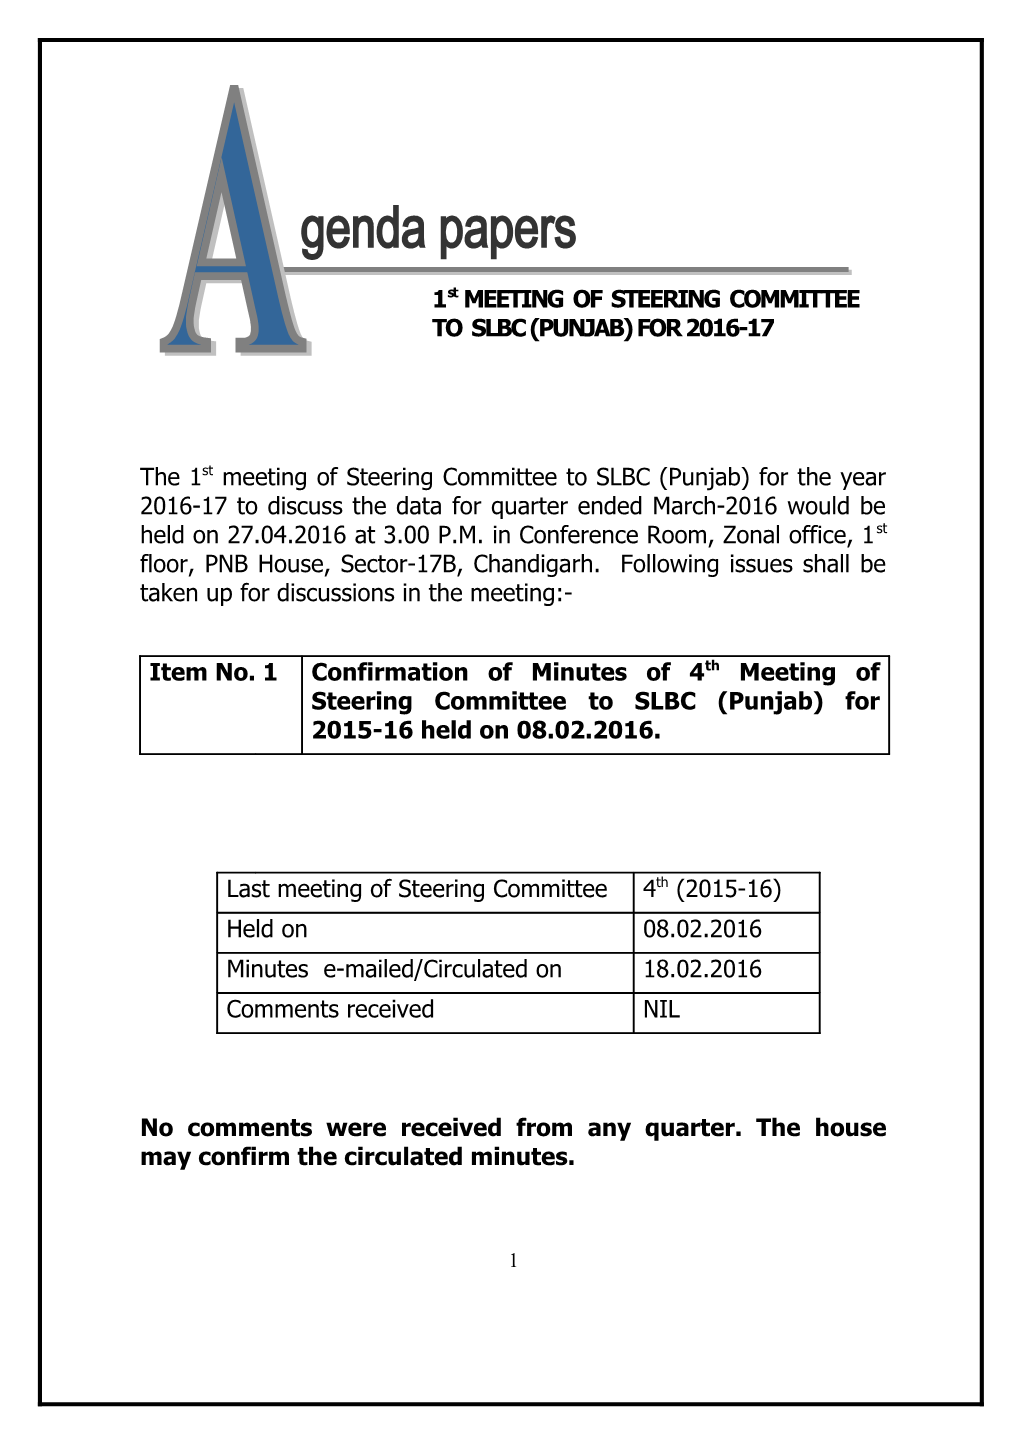 The 4Th Meeting Of Steering Committee Of SLBC (Punjab) For The Year 2005-06 Would Be Held On 24Th March 2006 At 3